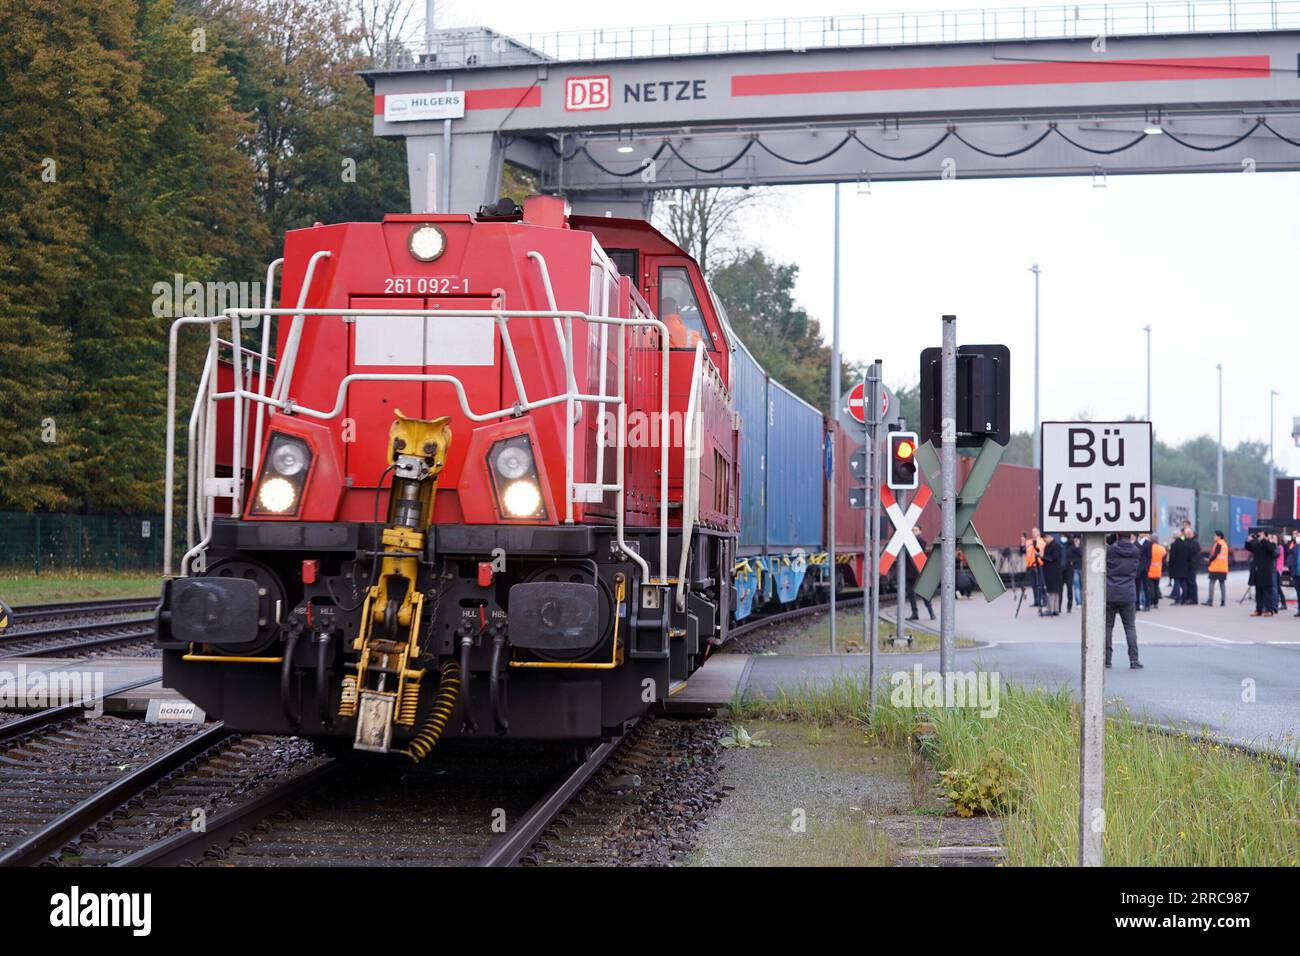 211027 -- HAMBURG, Oct. 27, 2021 -- China-Europe freight train Shanghai Express is seen in Hamburg, Germany, on Oct. 26, 2021. The first Shanghai Express, carrying 50 containers loaded with apparel, auto parts and solar panels, traveled more than 10,000 km before arriving in northern Germany late on Monday. The China-Europe freight trains traveling along 73 routes have reached more than 170 cities in 23 European countries, since it was launched in 2011.  GERMANY-HAMBURG-CHINA-EUROPE FREIGHT TRAIN-ARRIVAL WangxQing PUBLICATIONxNOTxINxCHN Stock Photo